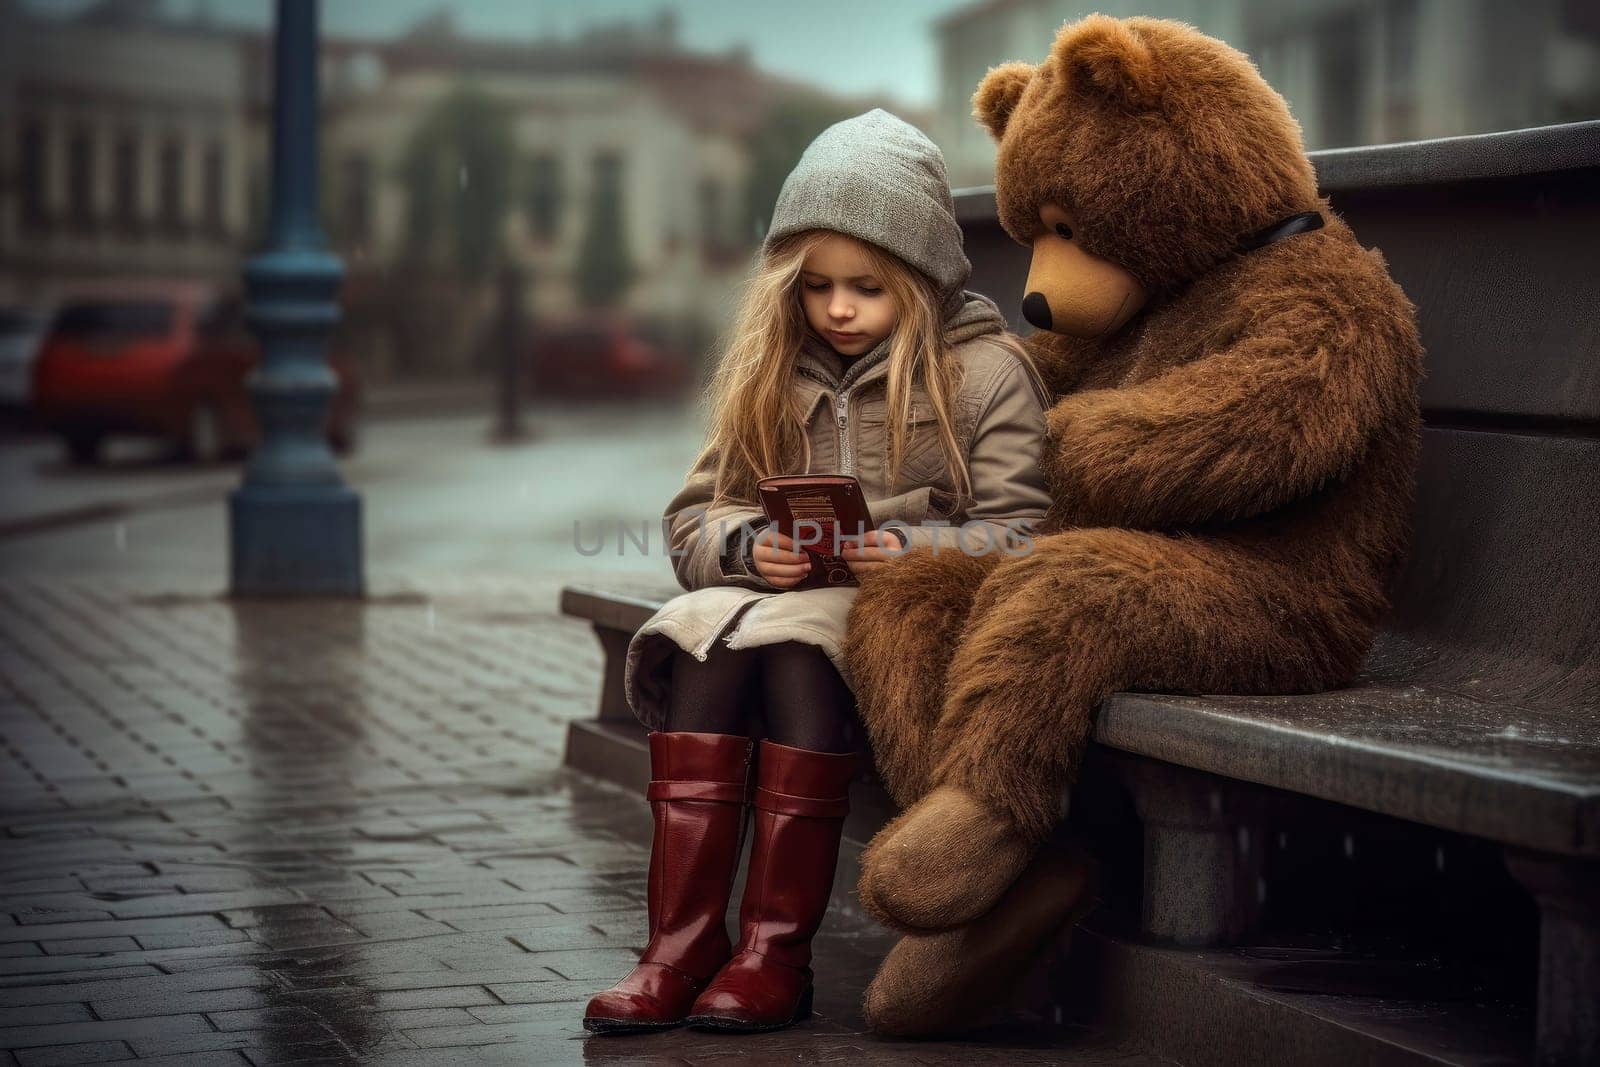 Image depicting a little girl with her teddy bear, captivated by a smartphone, symbolizing the modern generation's fixation on social media.